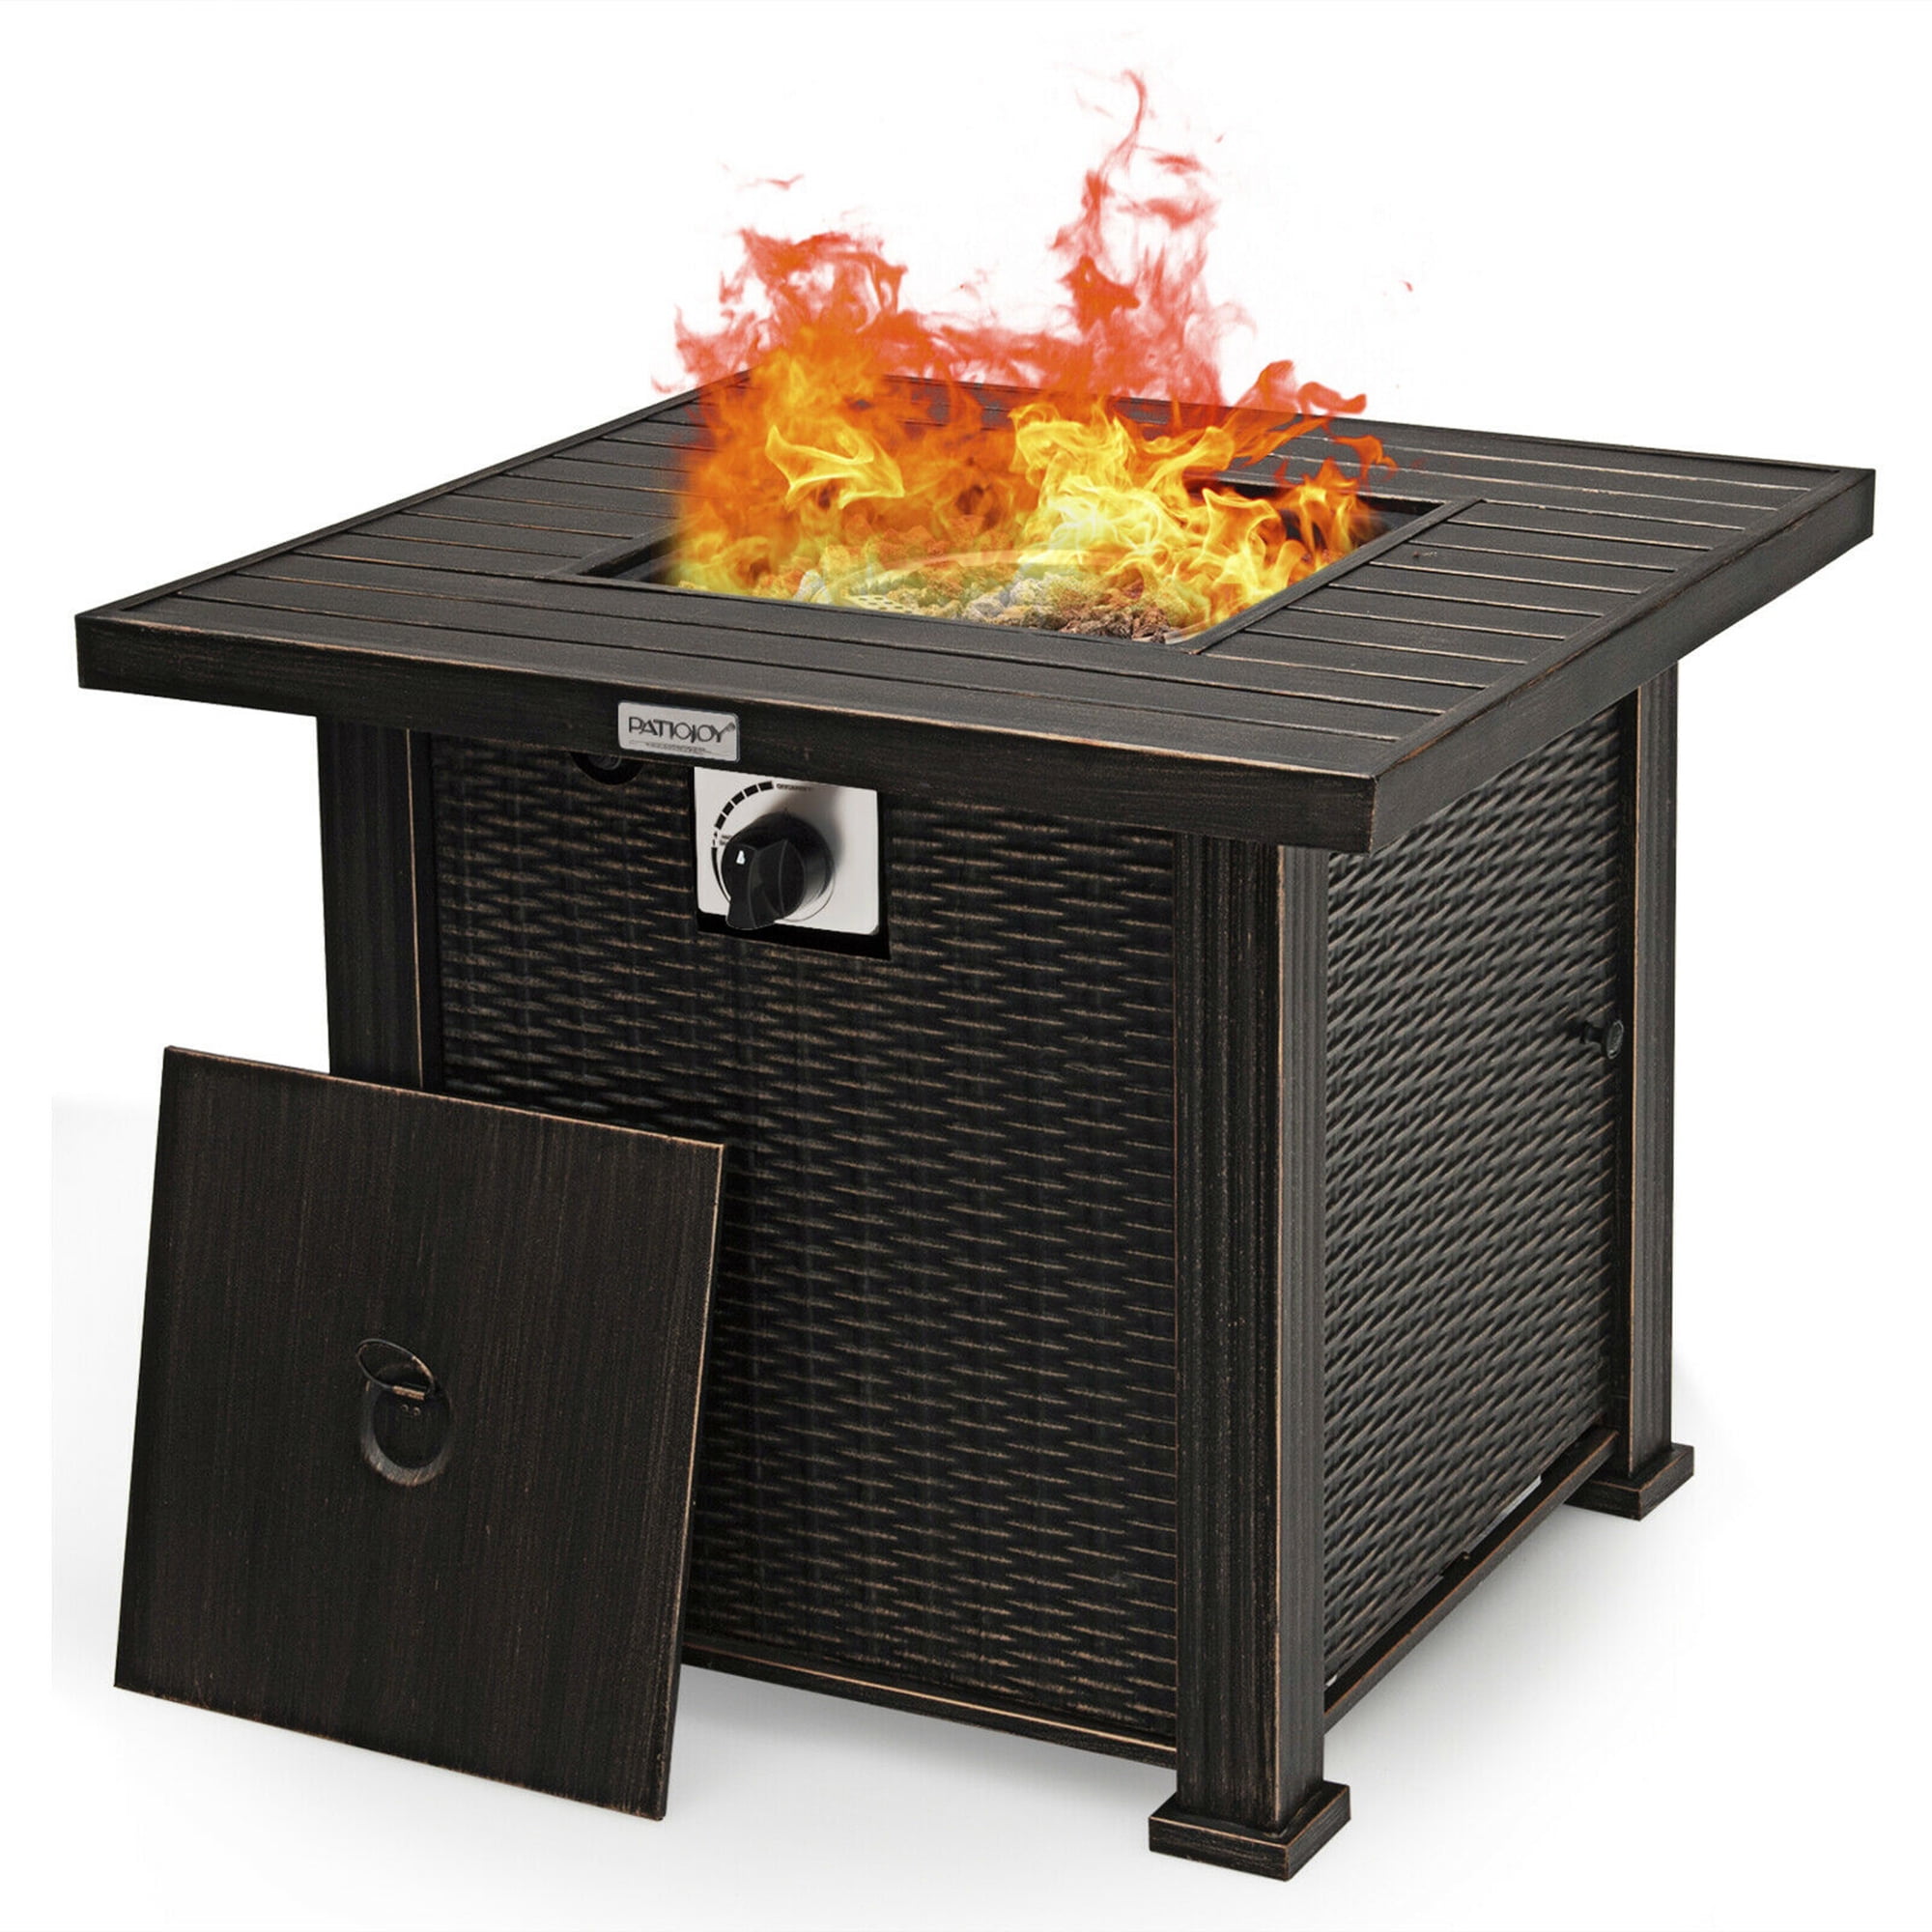 Gymax 30 Gas Fire Pit Table 50 000 Btu, Are Propane Fire Pits Any Good